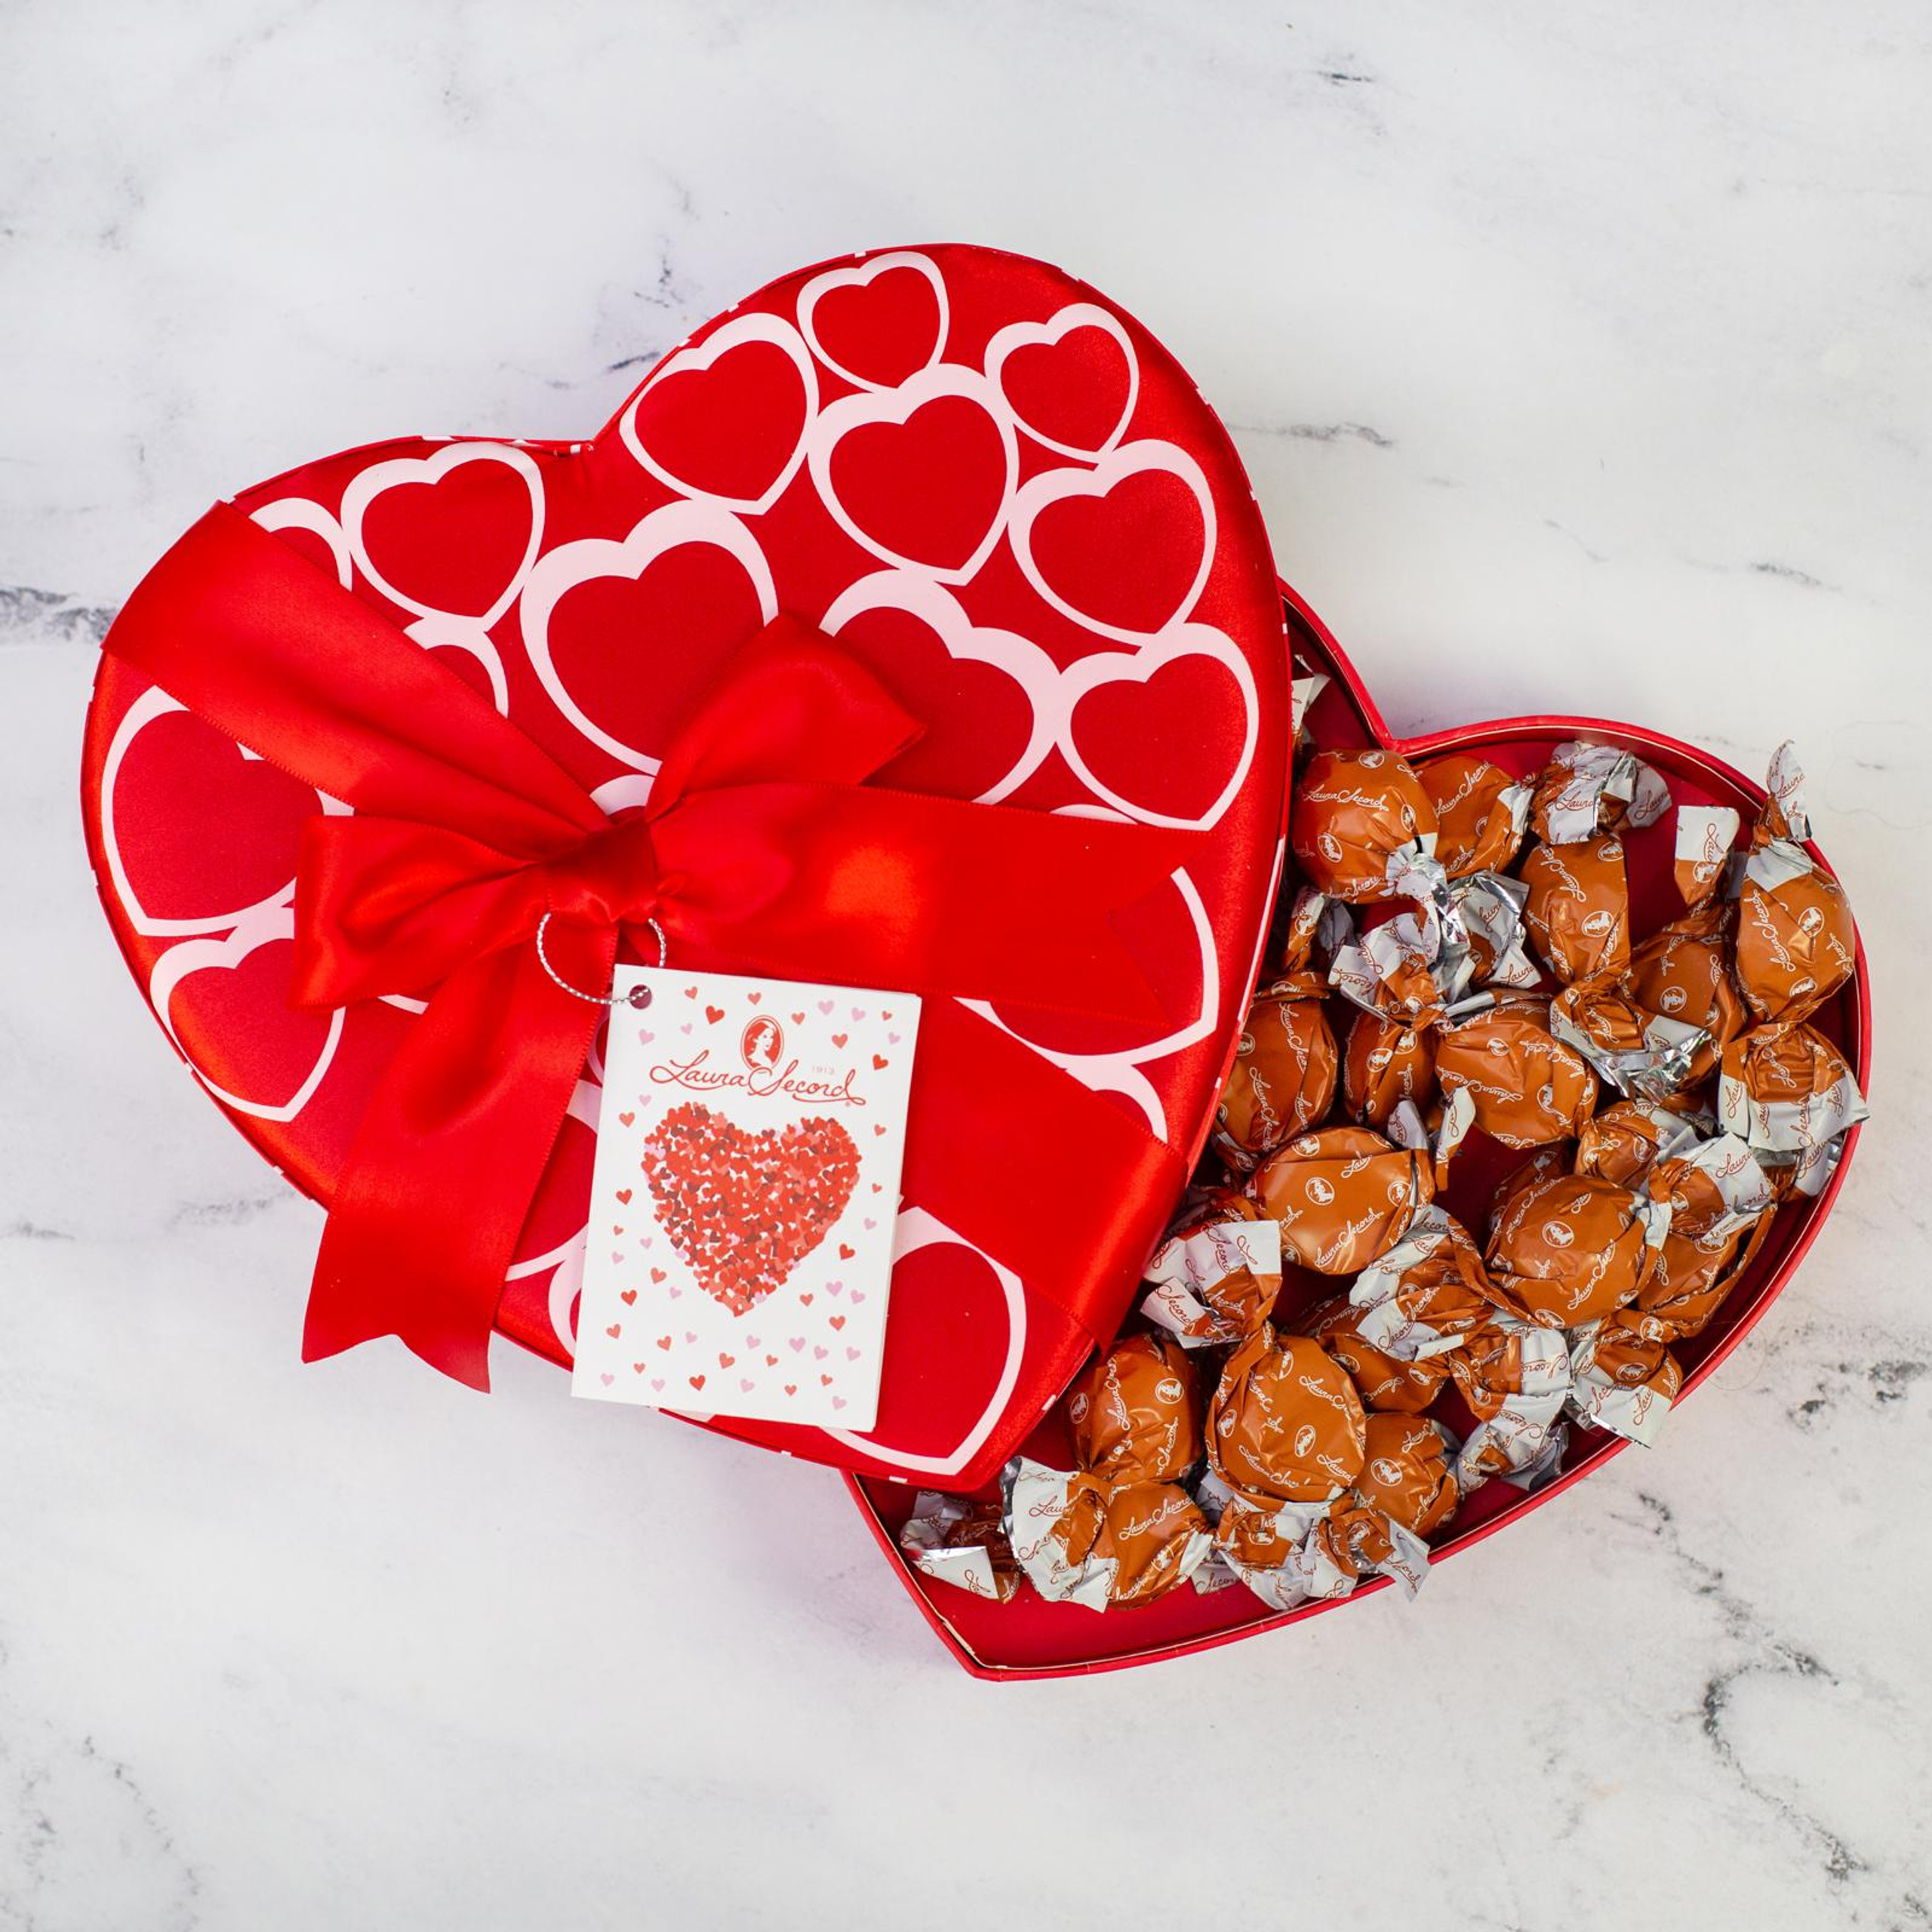 Queen of Hearts - Salted Caramel Chocolates 288 g [92365]